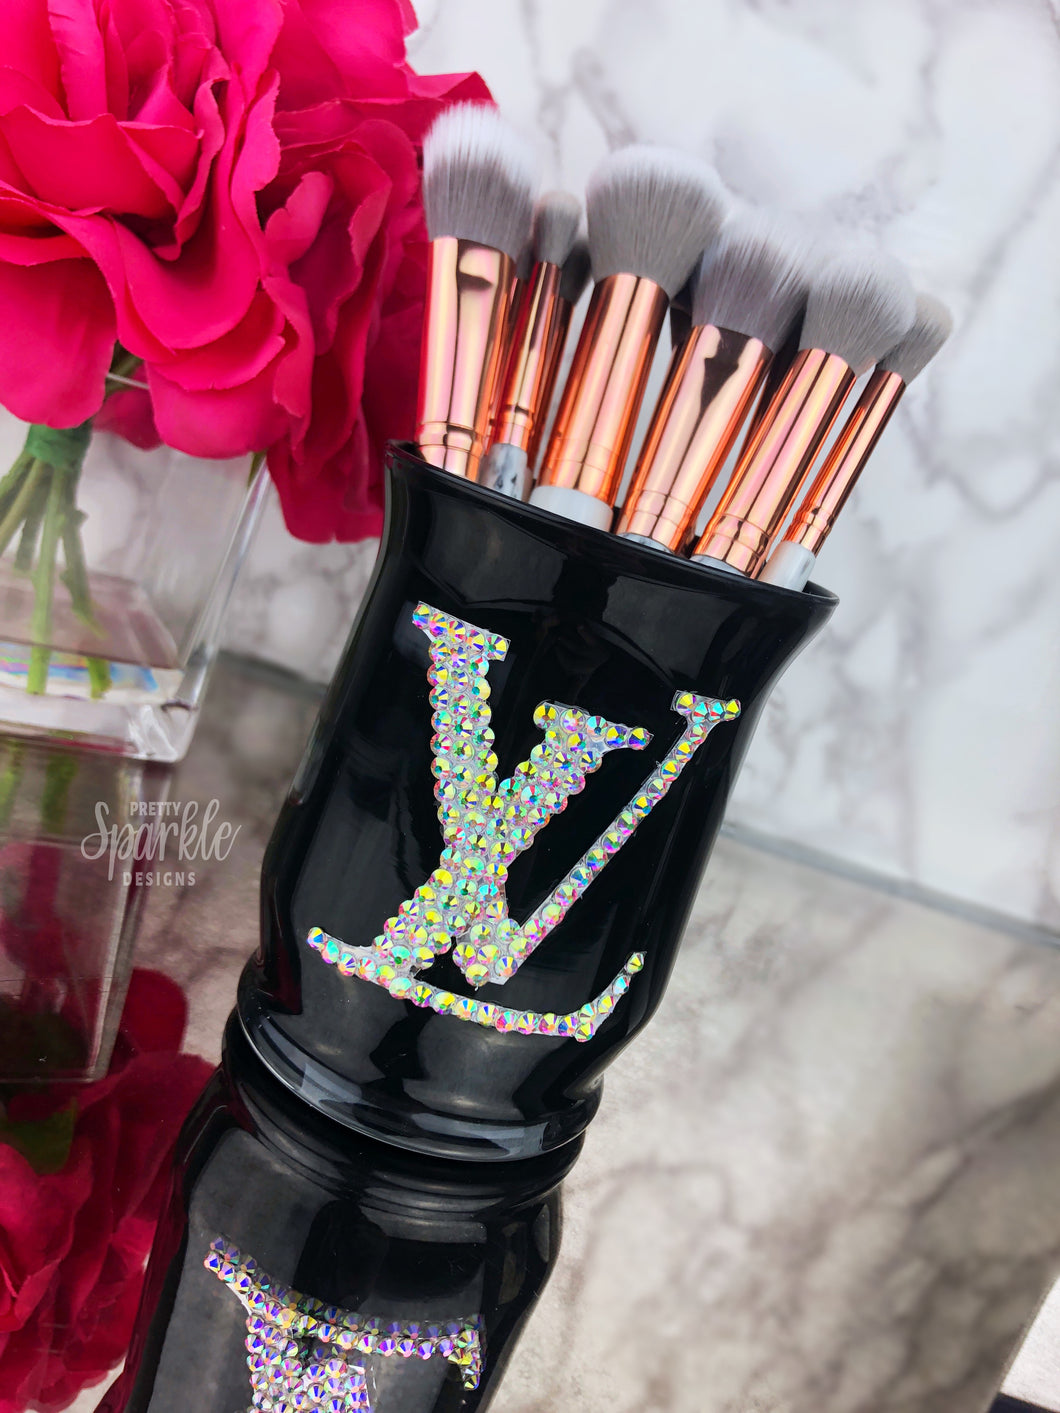 Louis Vuitton, Accessories, Lv Branded Makeup Brushes